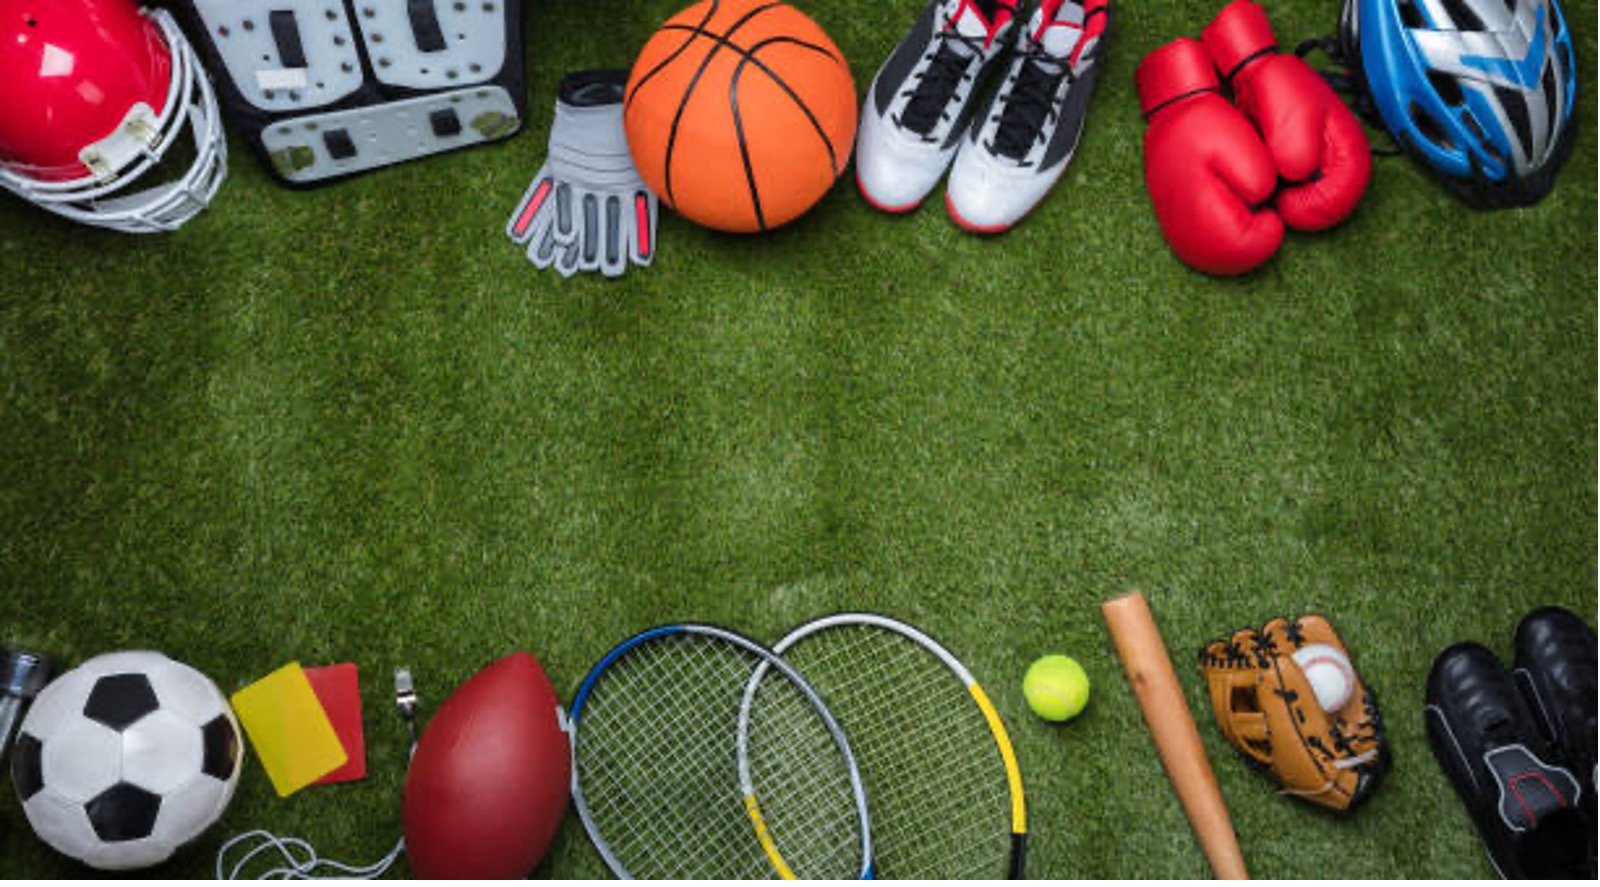 Featured Image of Obodo Article, "5 Ways to Economical Barter for Exclusive Sports Equipment"